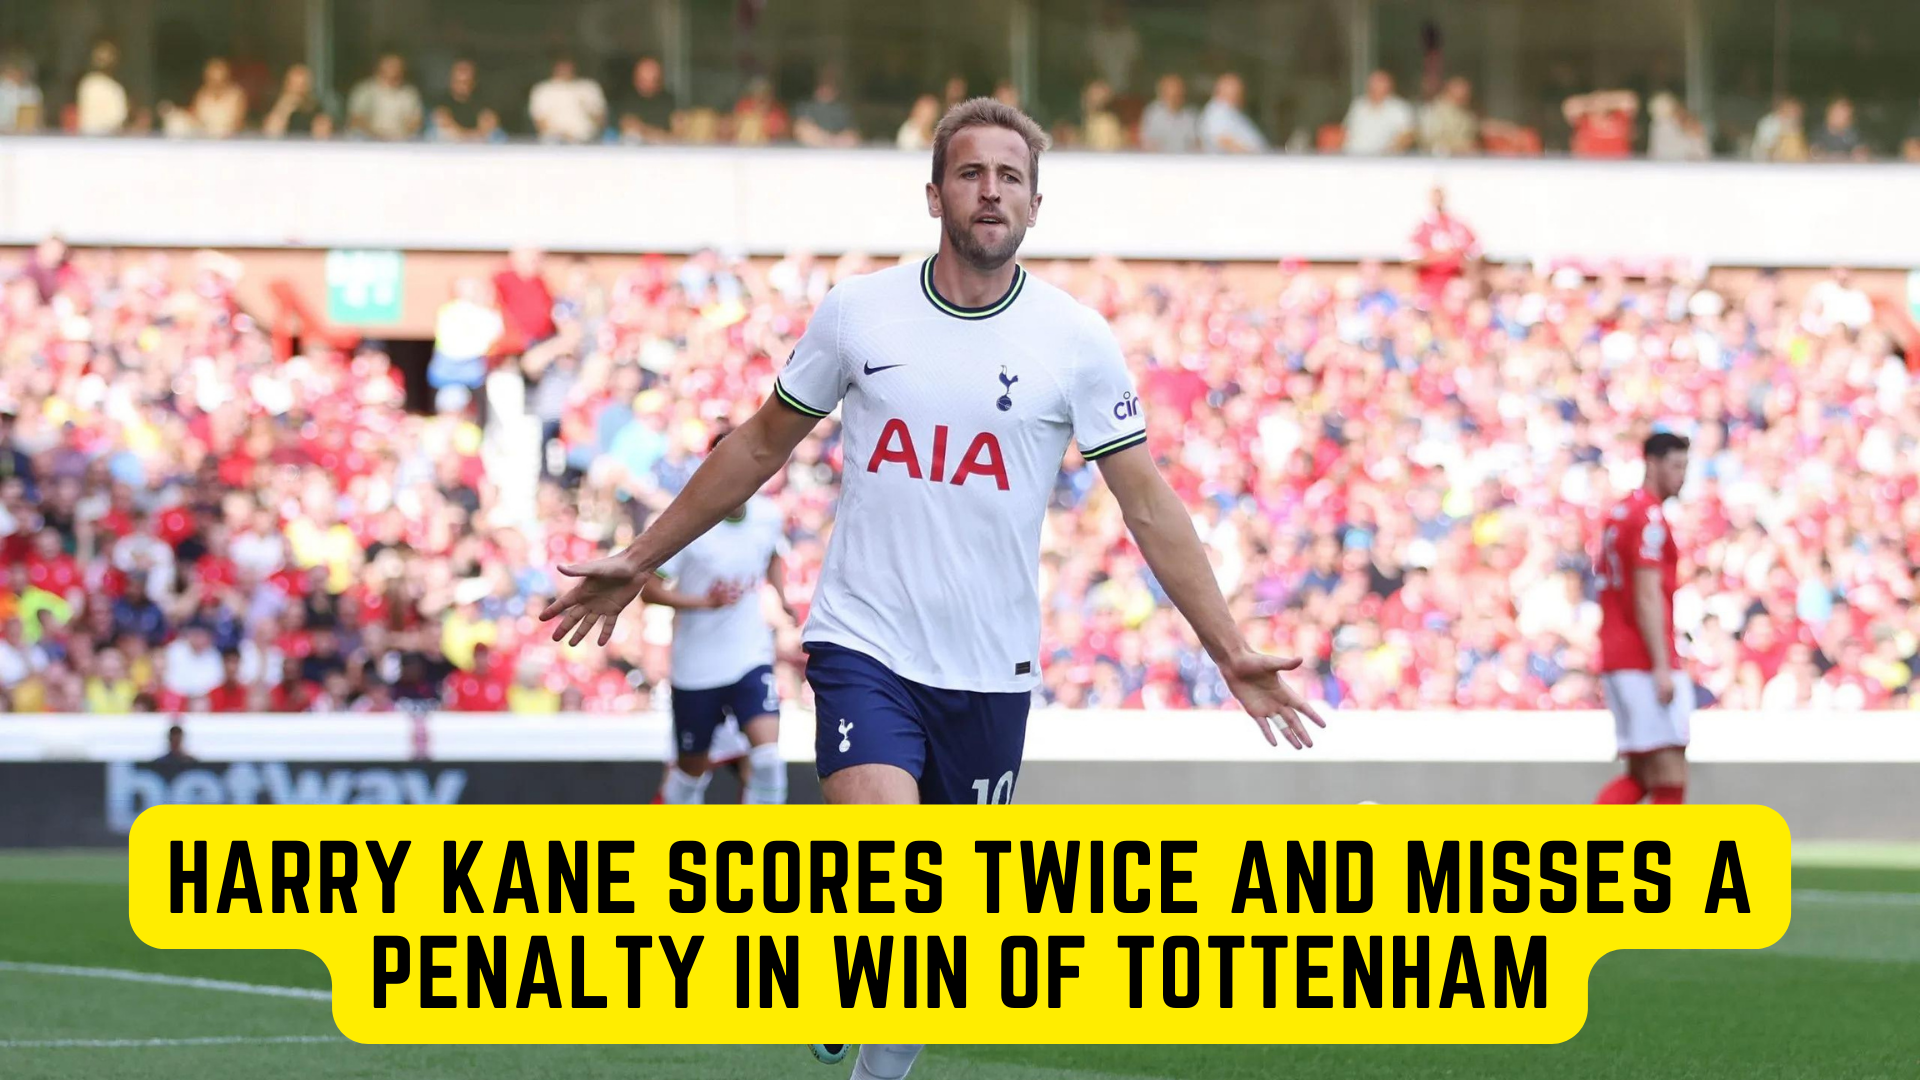 Harry Kane Scores Twice And Misses A Penalty In Win Of Tottenham